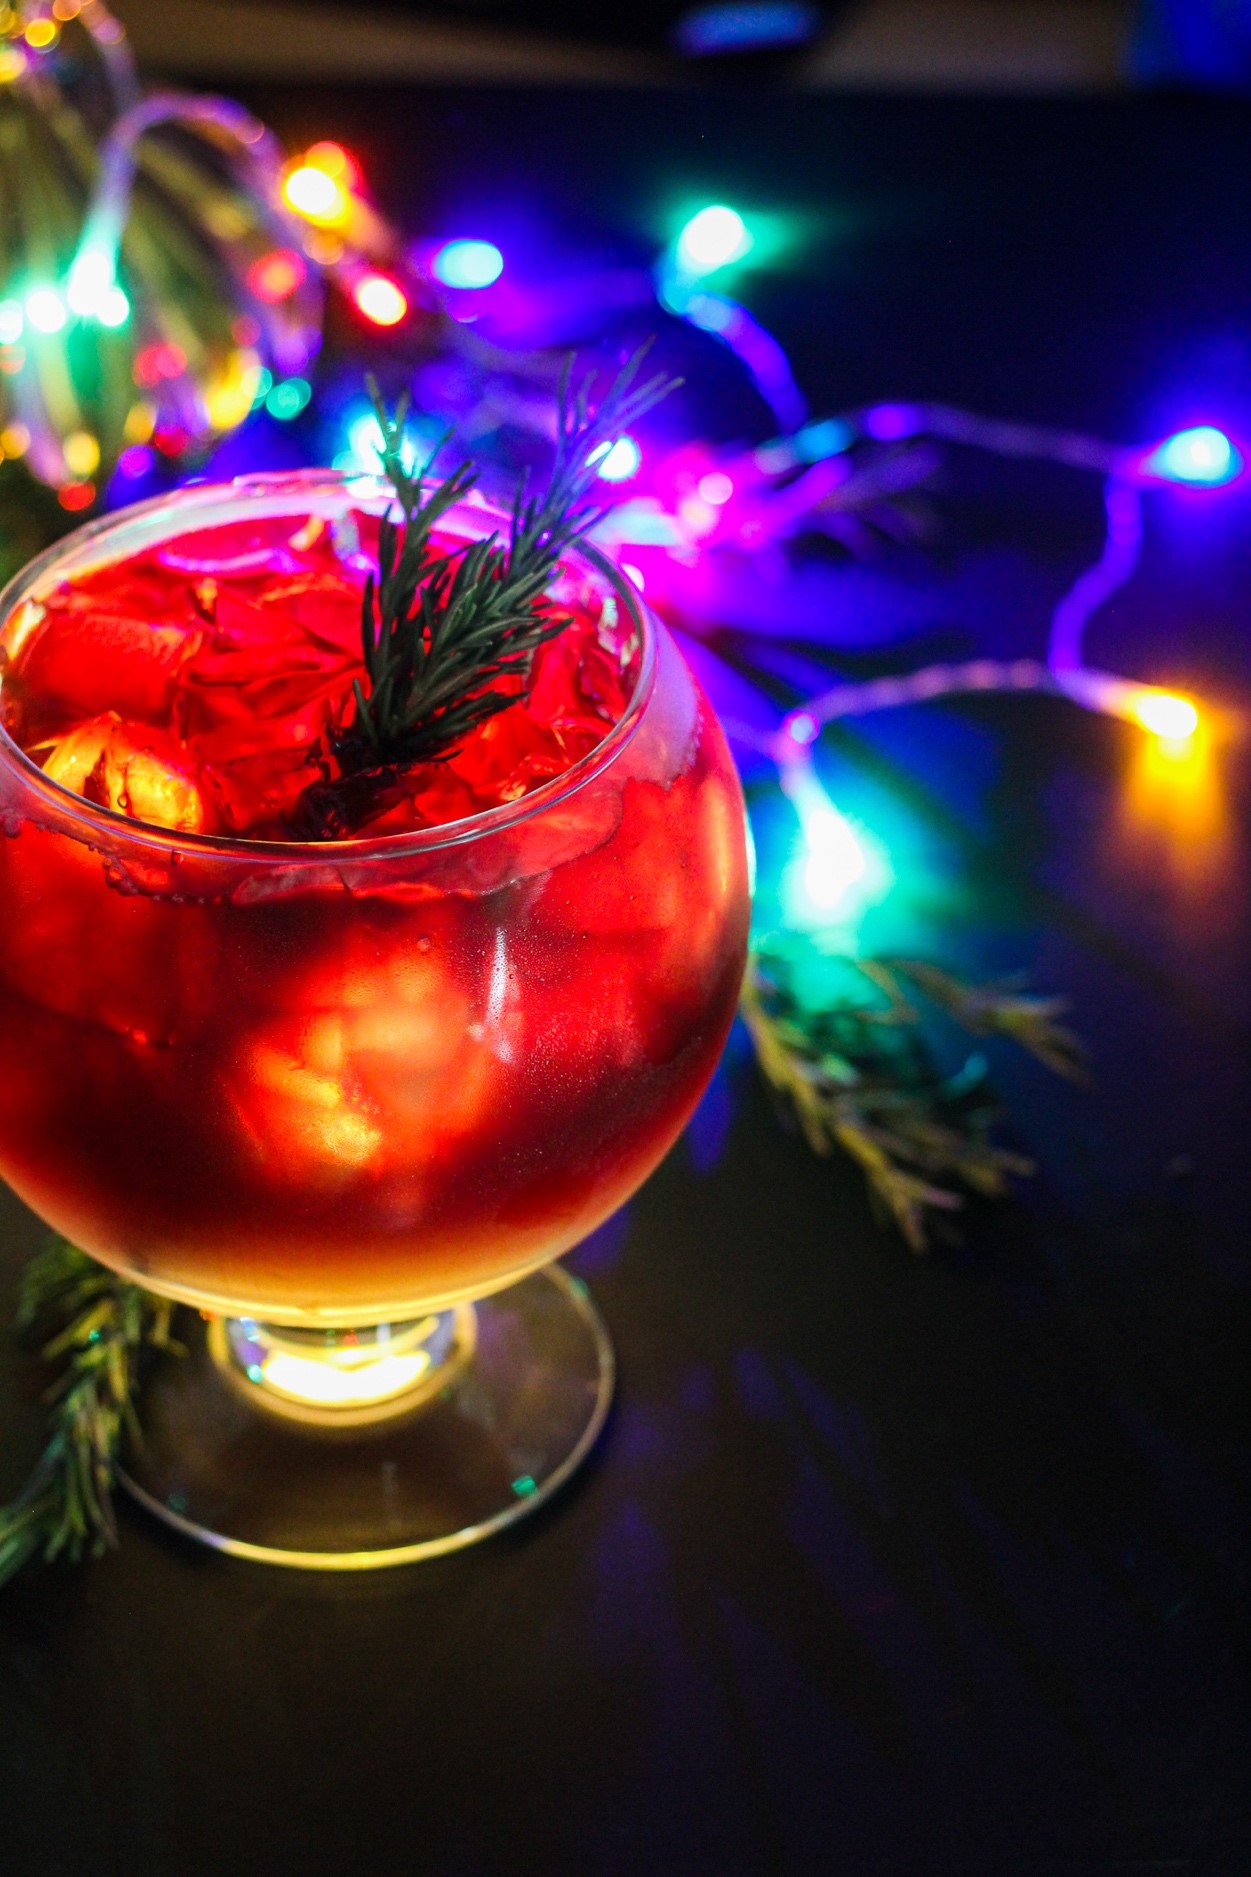 Downtown Disney Celebrates the Holidays With Specialty Glow Cocktails